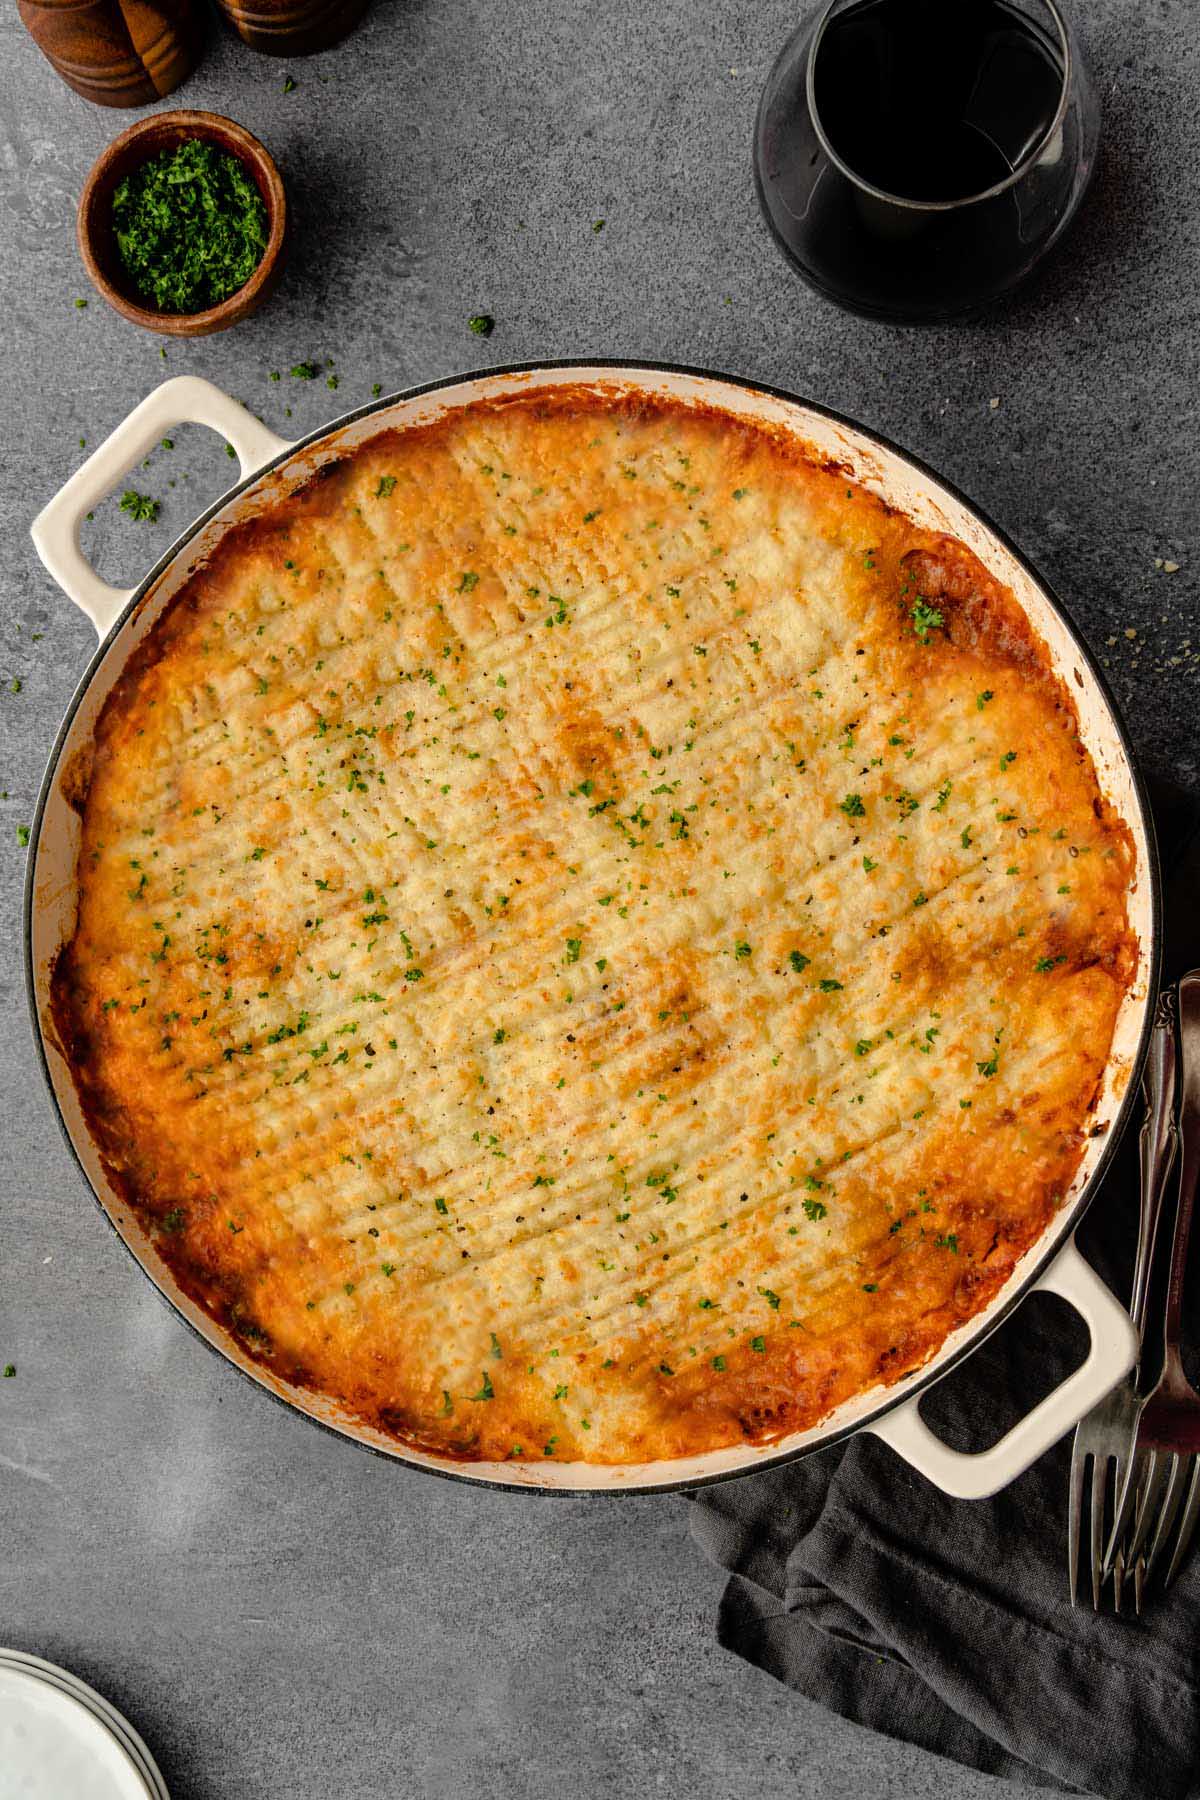 A large casserole dish of Shepherd's Pie with forks, red wine, and chopped parsley on the side.